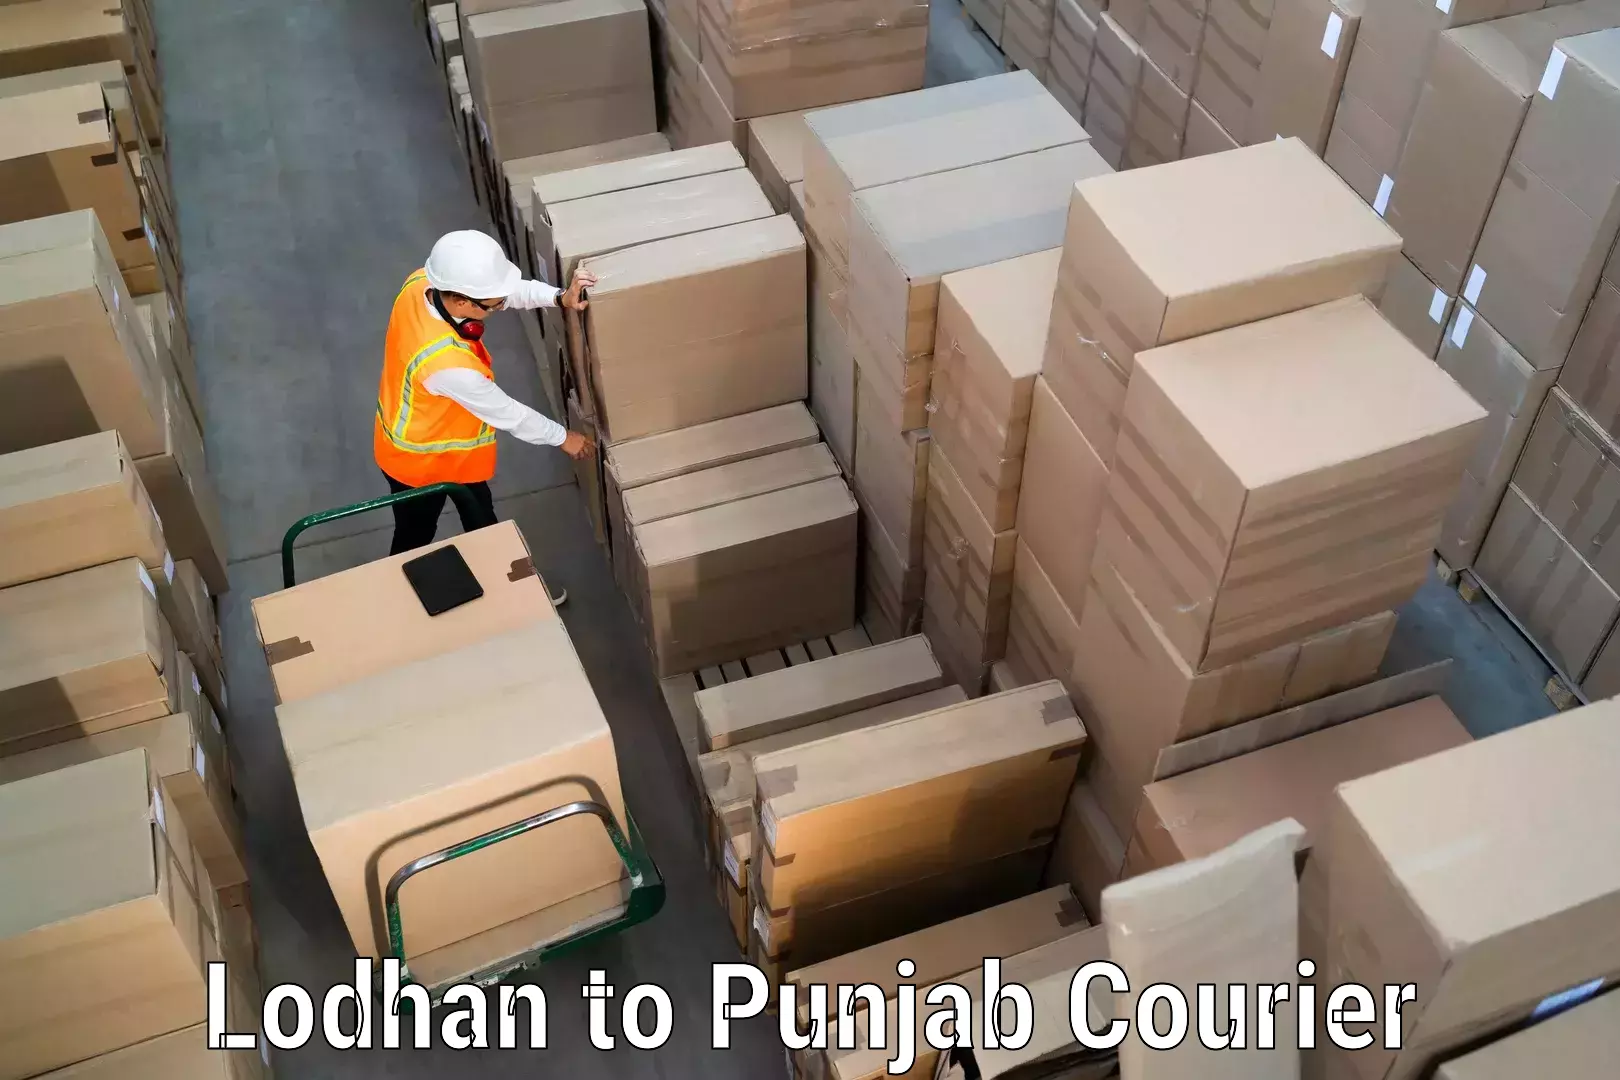 Package tracking in Lodhan to Fazilka